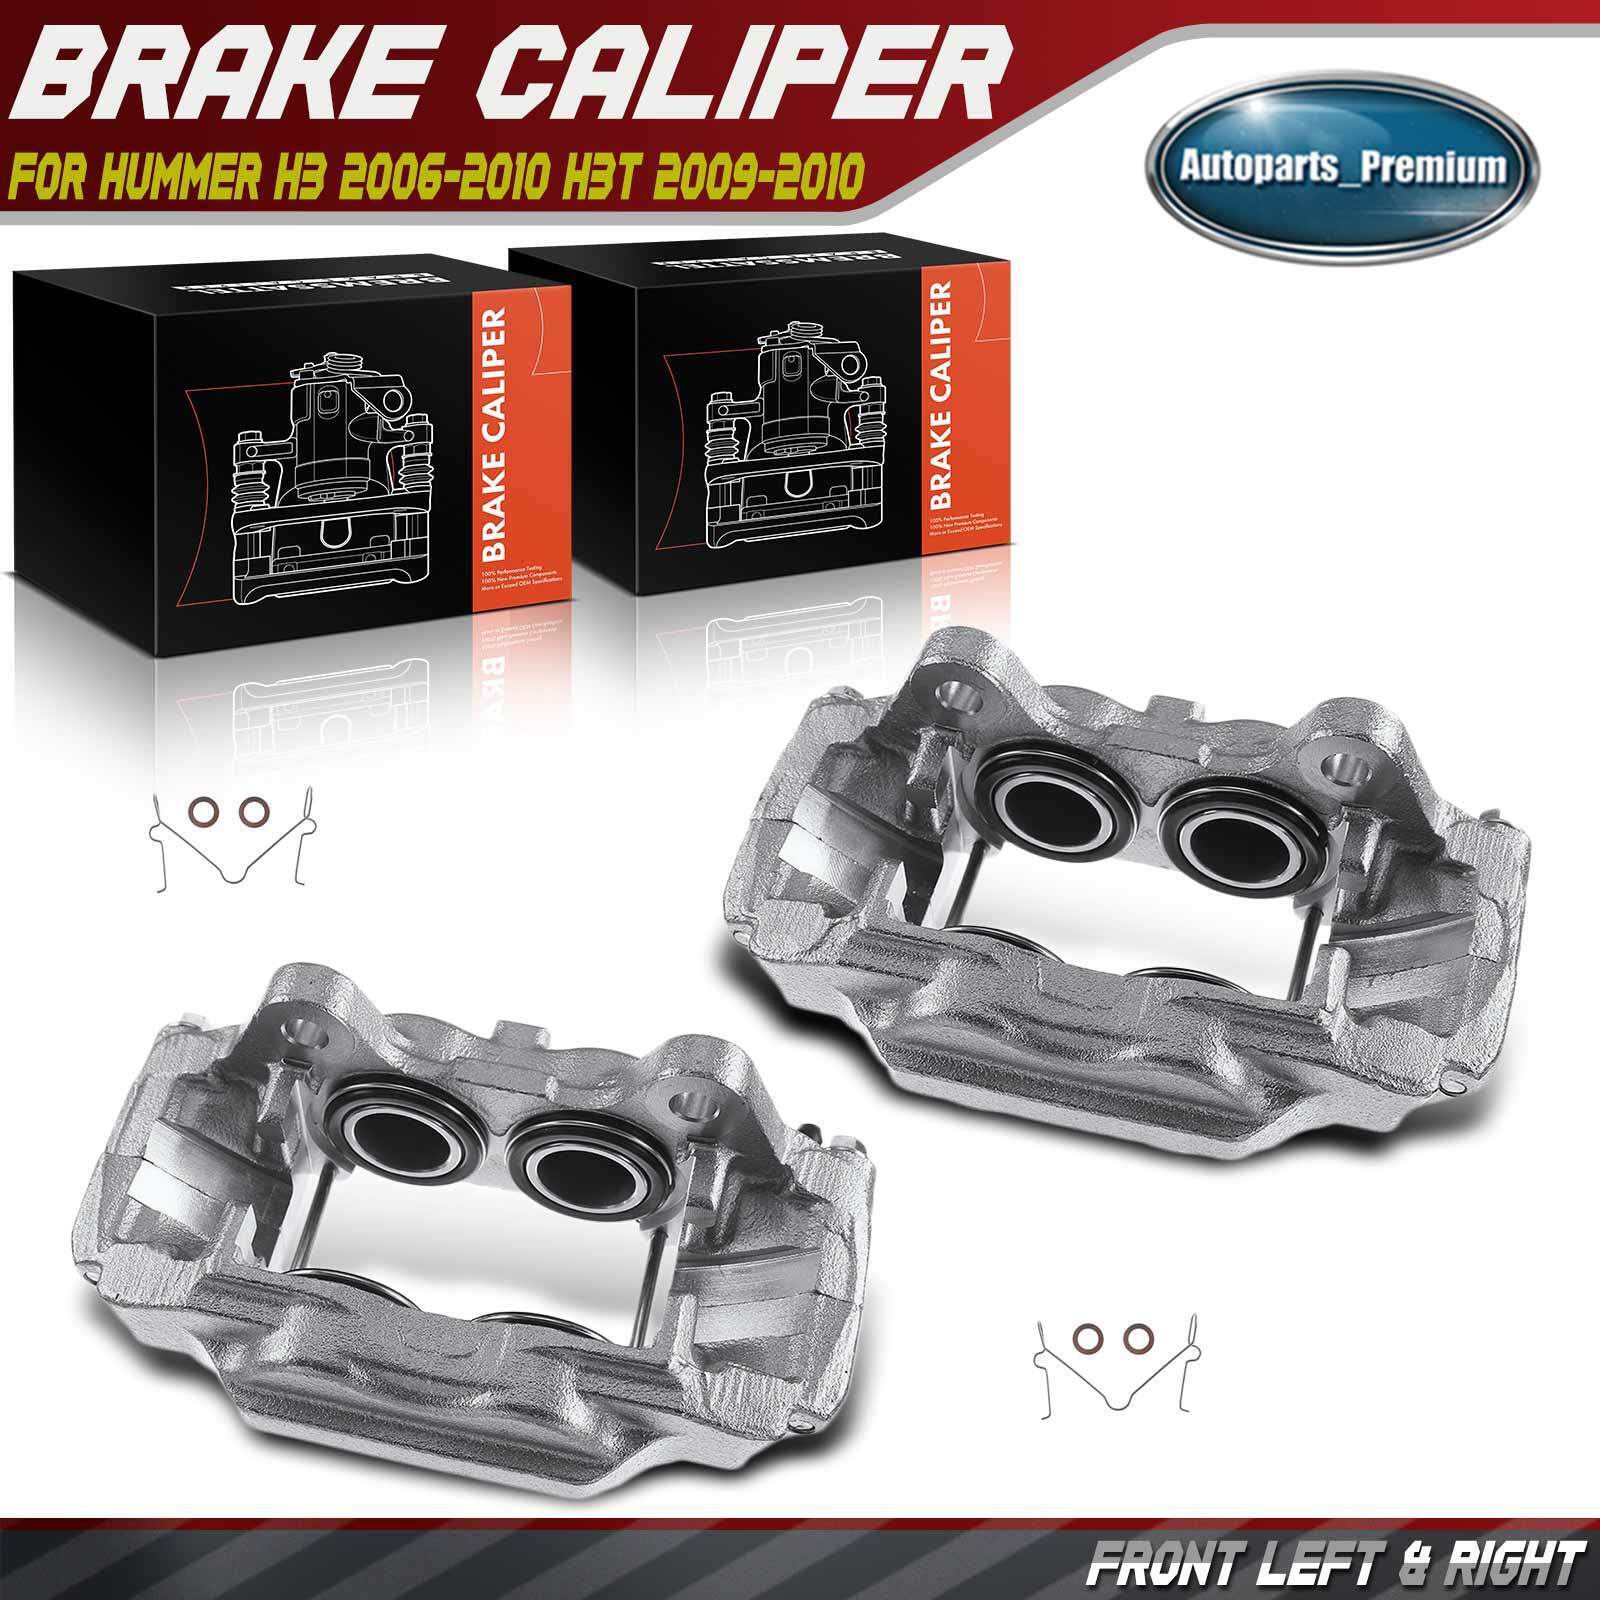 2x Disc Brake Calipers Steel Piston for Hummer H3 2006-2010 H3T Front Left&Right